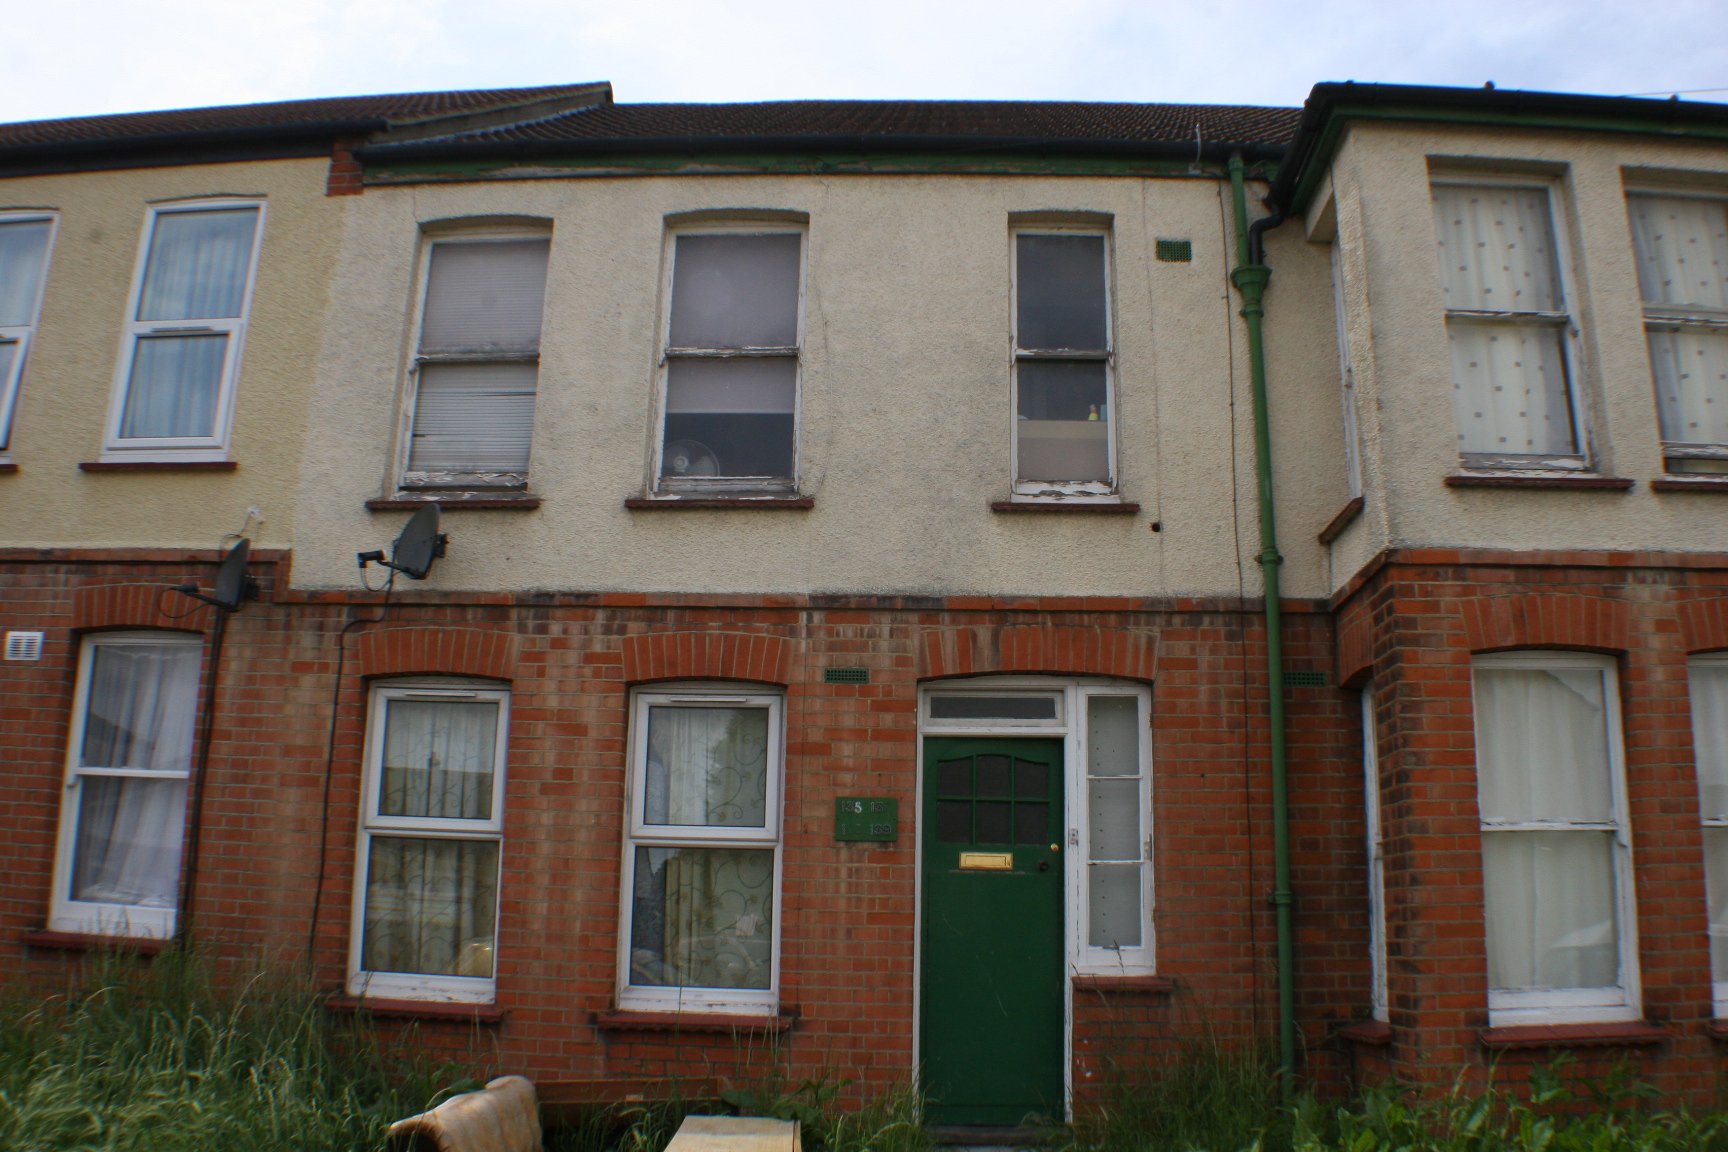 1 bed Ground floor flat for rent in Westcliff-on-Sea. From Griffin Property Co - Lettings